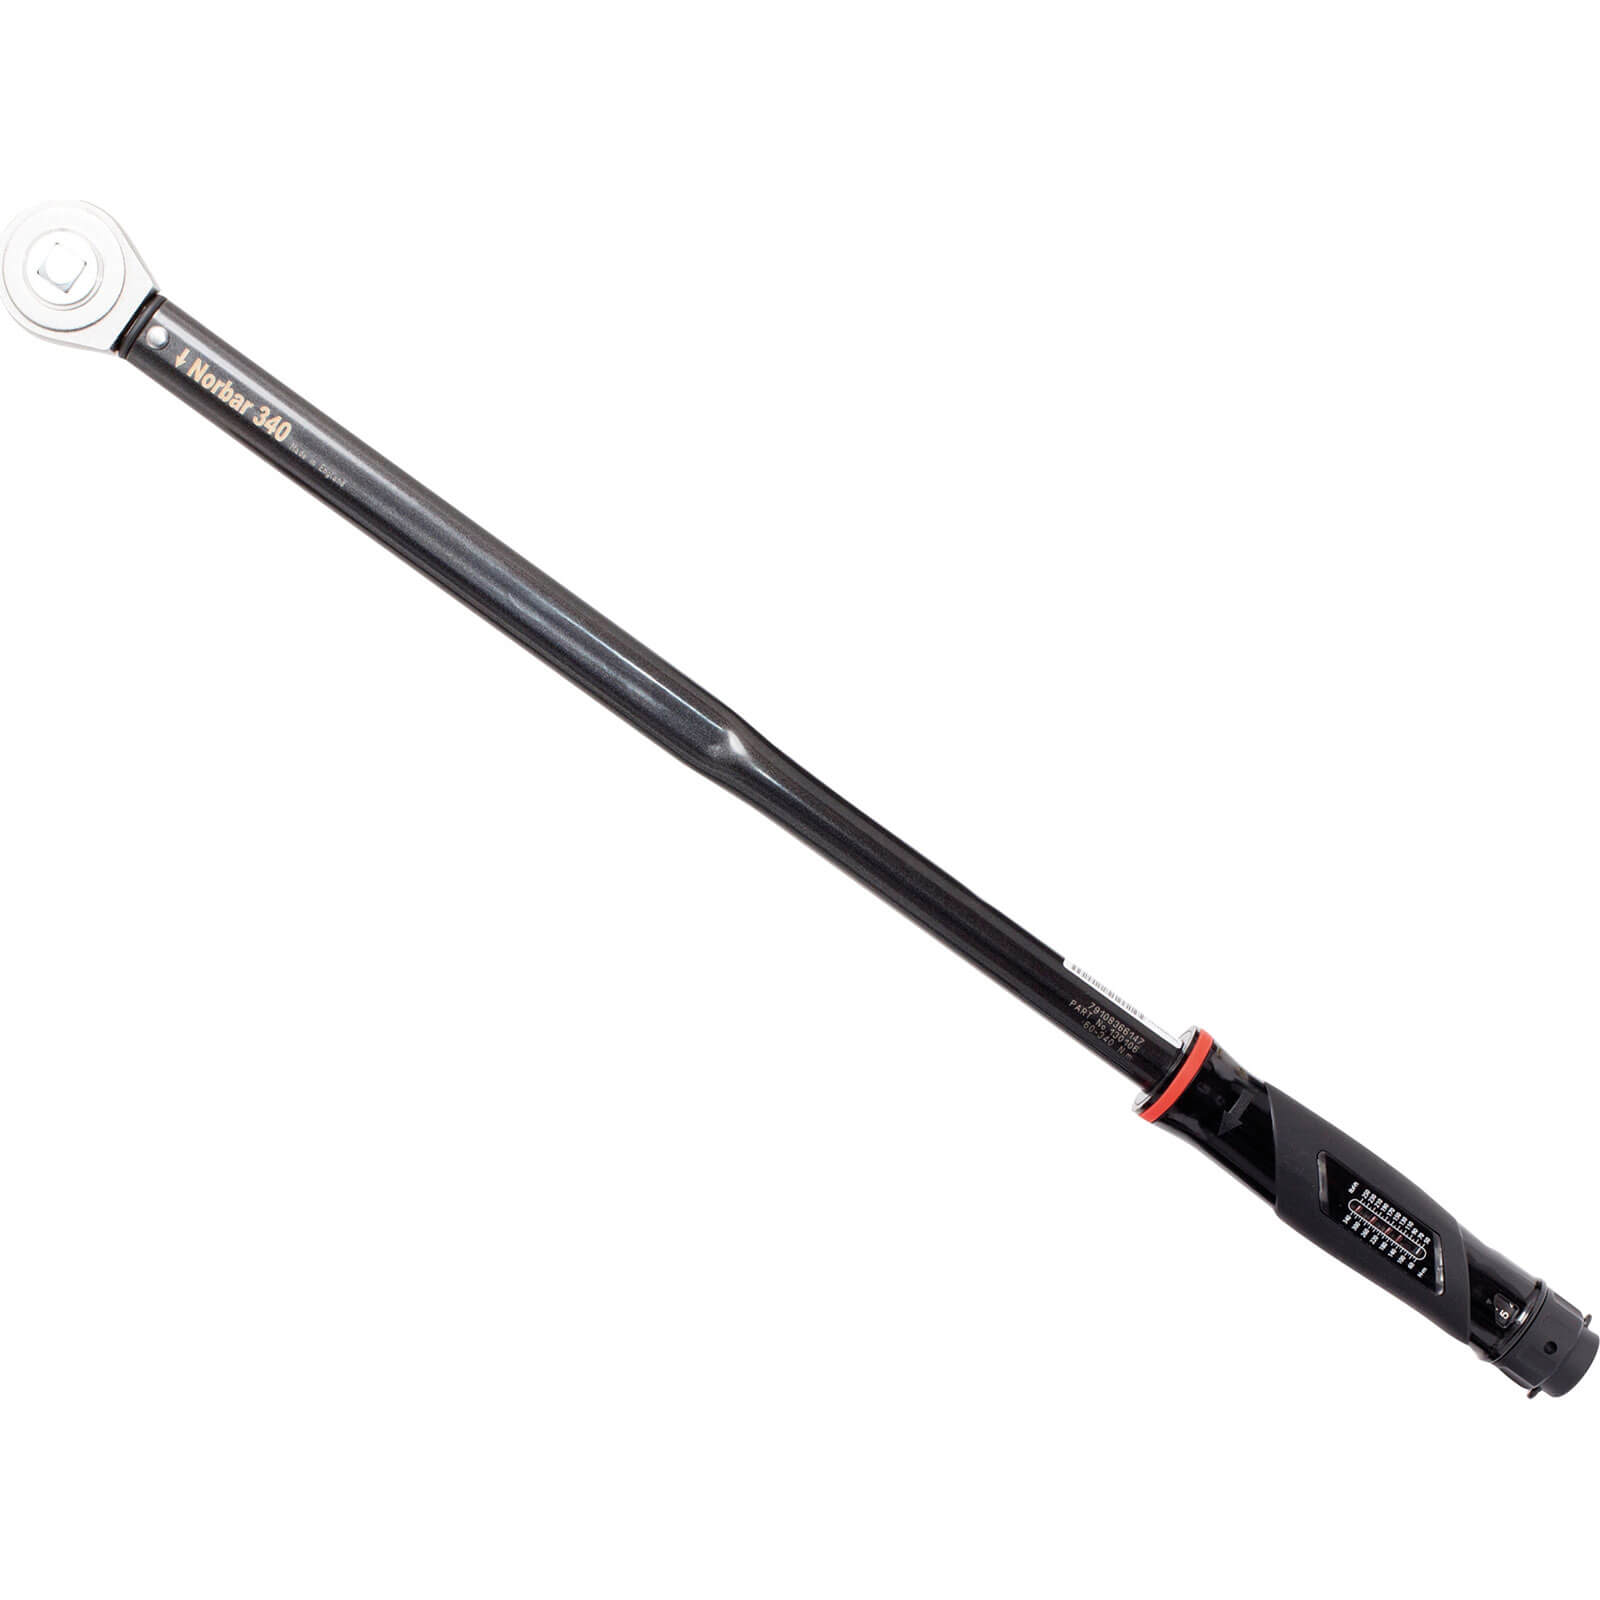 Image of Norbar 1/2" Nortorque Adjustable Dual Scale Ratchet Torque Wrench 1/2" 60Nm - 340Nm